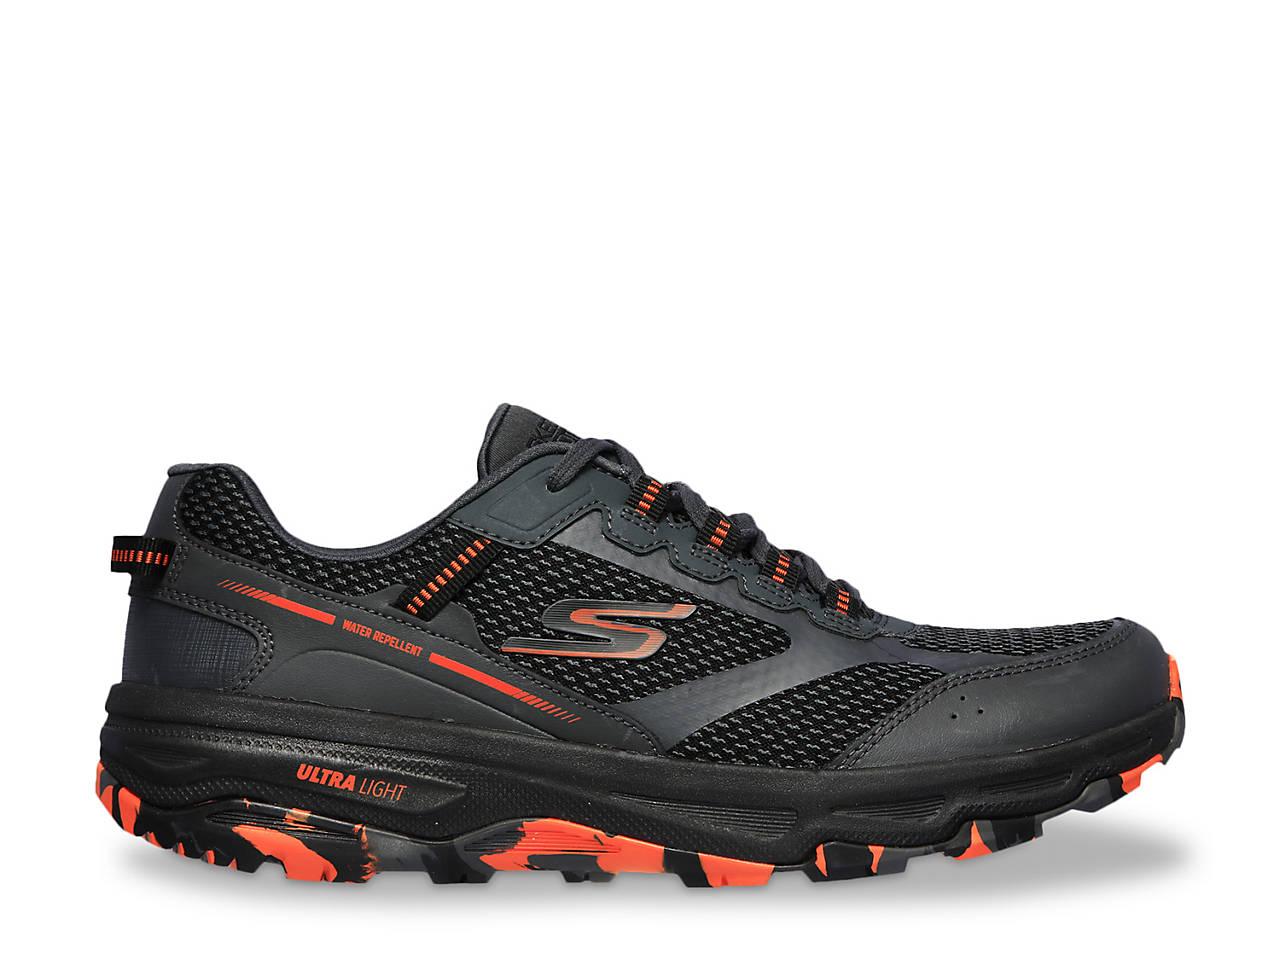 Skechers Leather Go Run Trail Altitude Running Shoe in Black/Charcoal ...